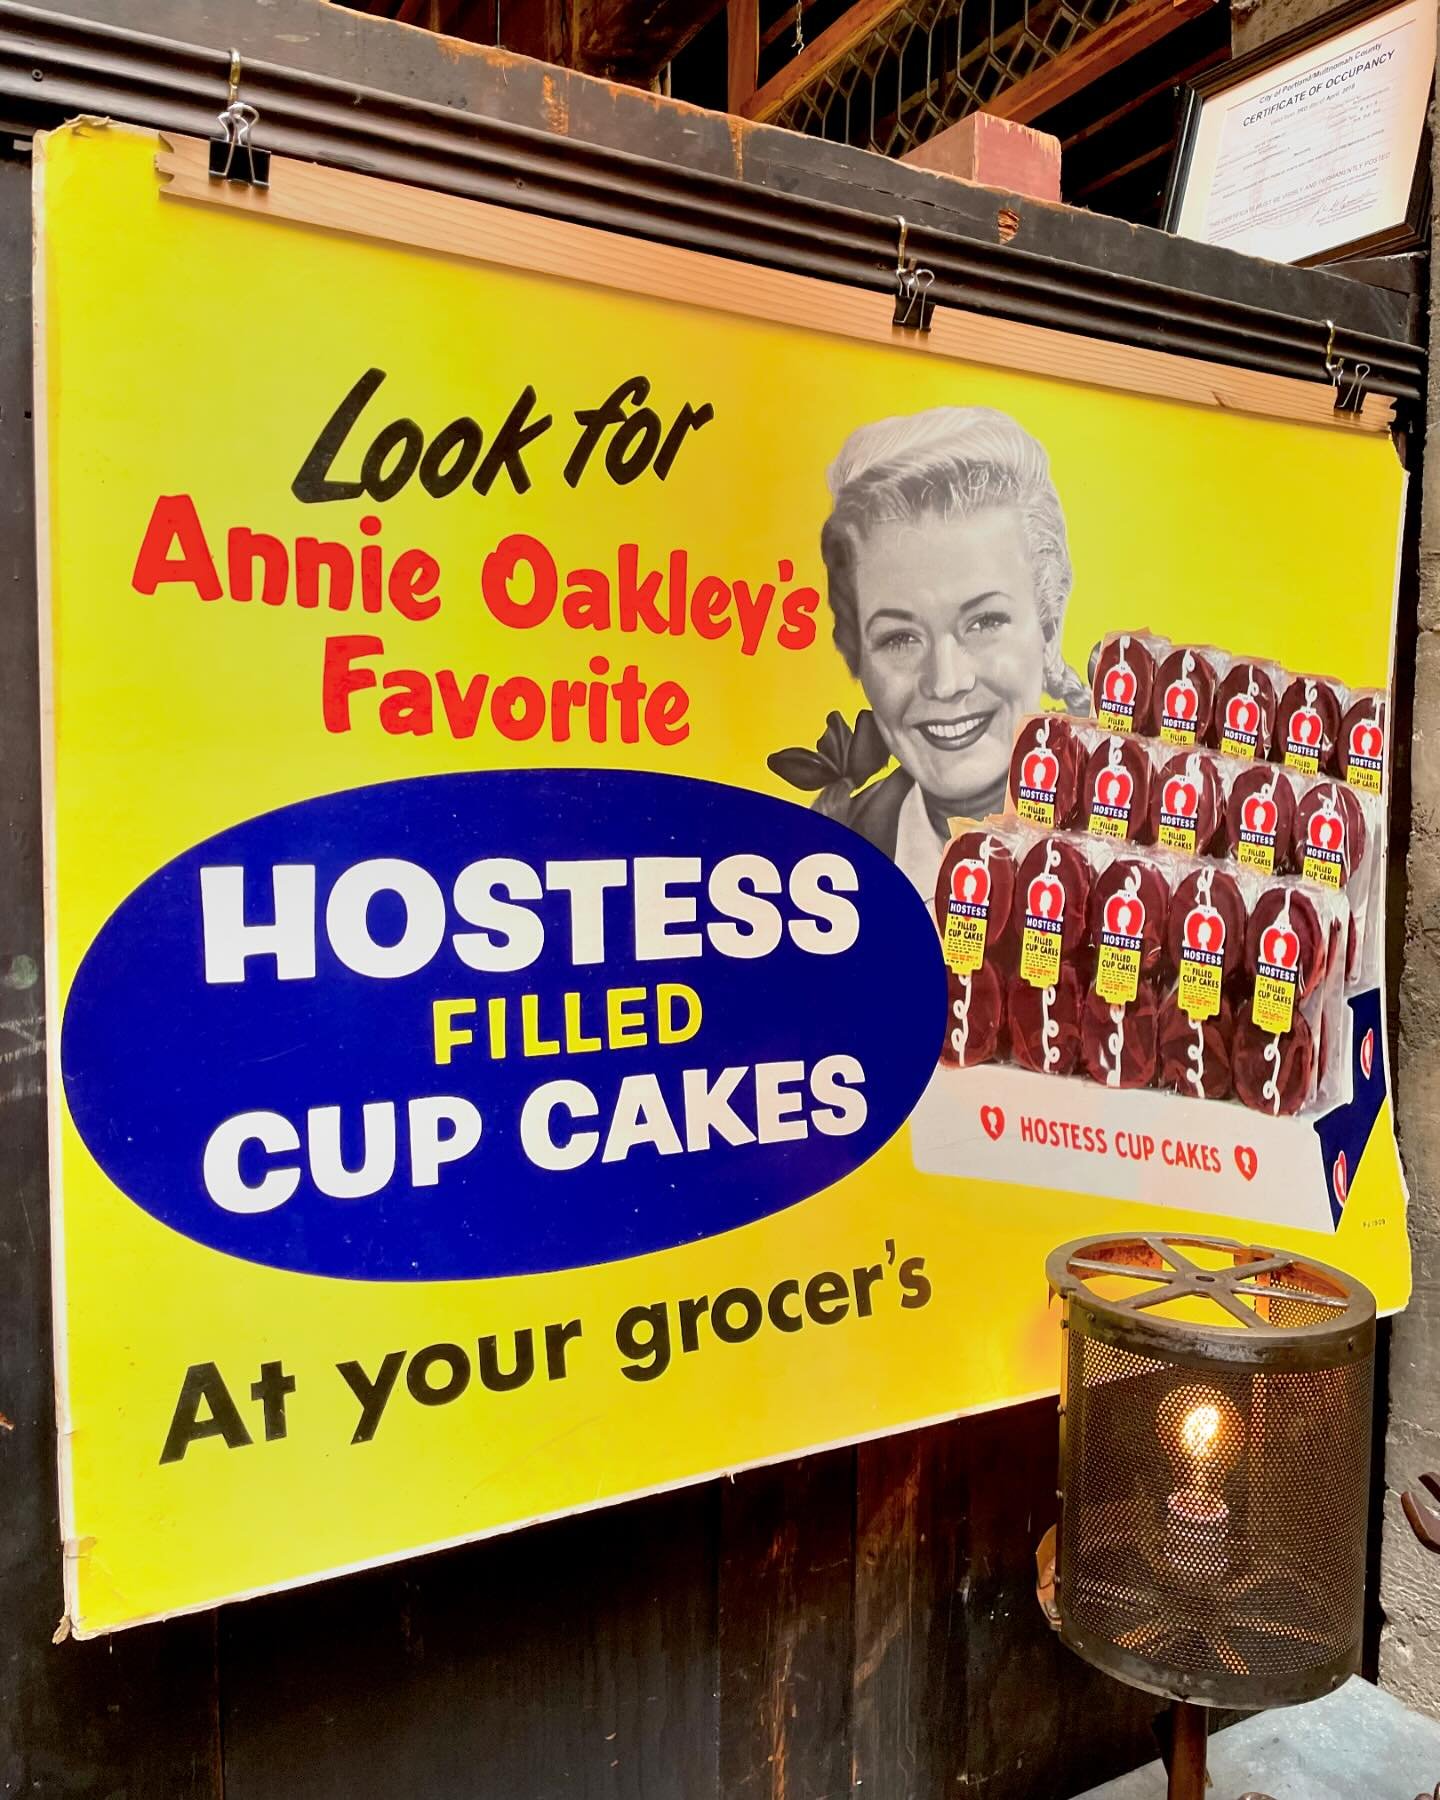 You just never know who's gonna come waltzin'  through the front door!
Today, it was Annie Oakley (circa 1955), touting her favorite Hostess Filled Cupcakes!
🧁
32&quot; x 44&quot; on waxed poster board. 70 years of wear to the corners. Local pickup 